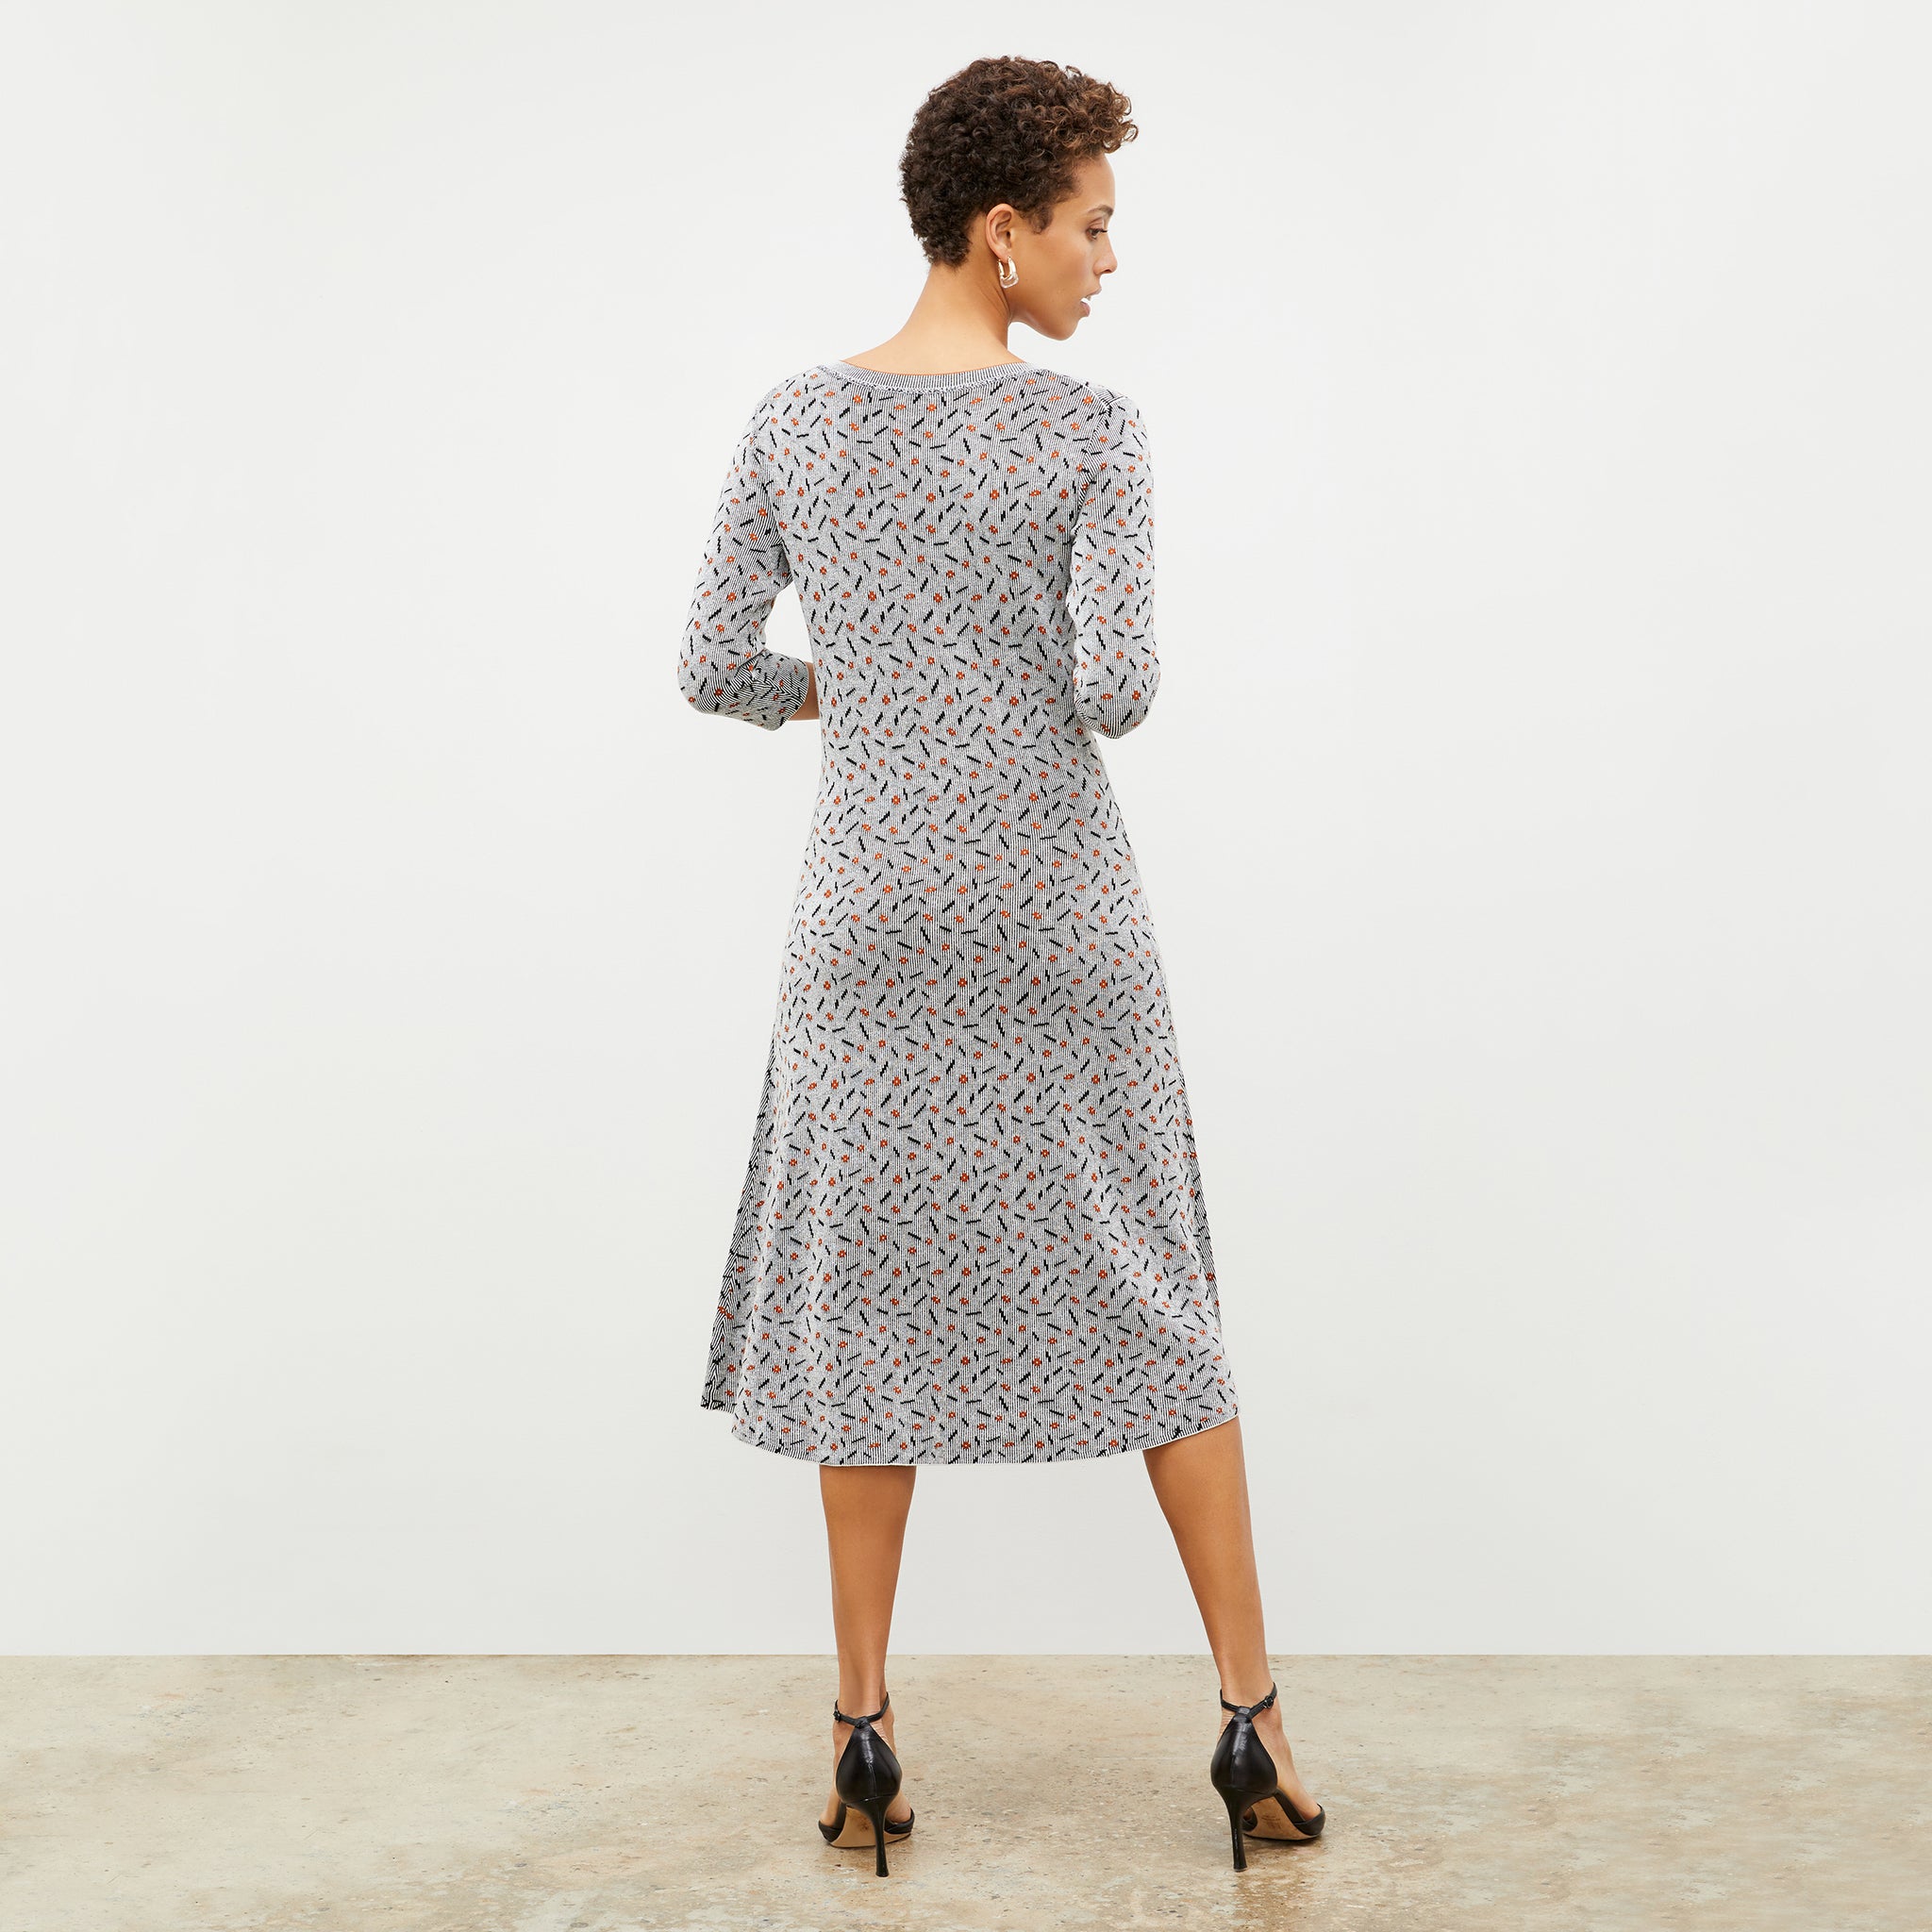 Back image of a woman wearing the Tippy Dress in Brick and Black